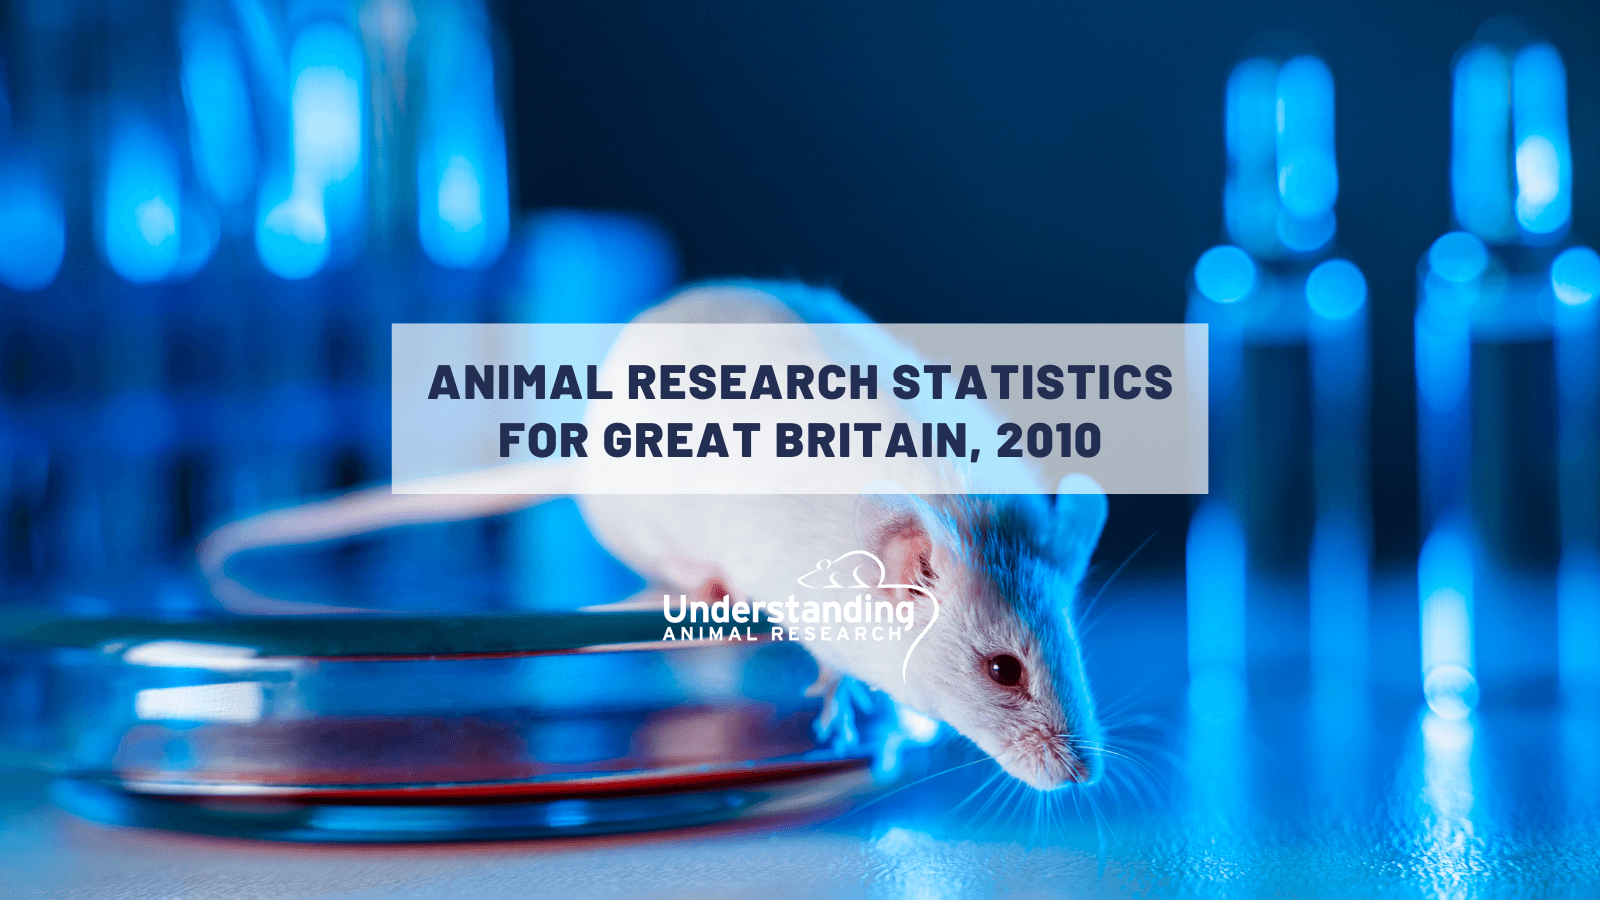 Animal research statistics for Great Britain, 2010